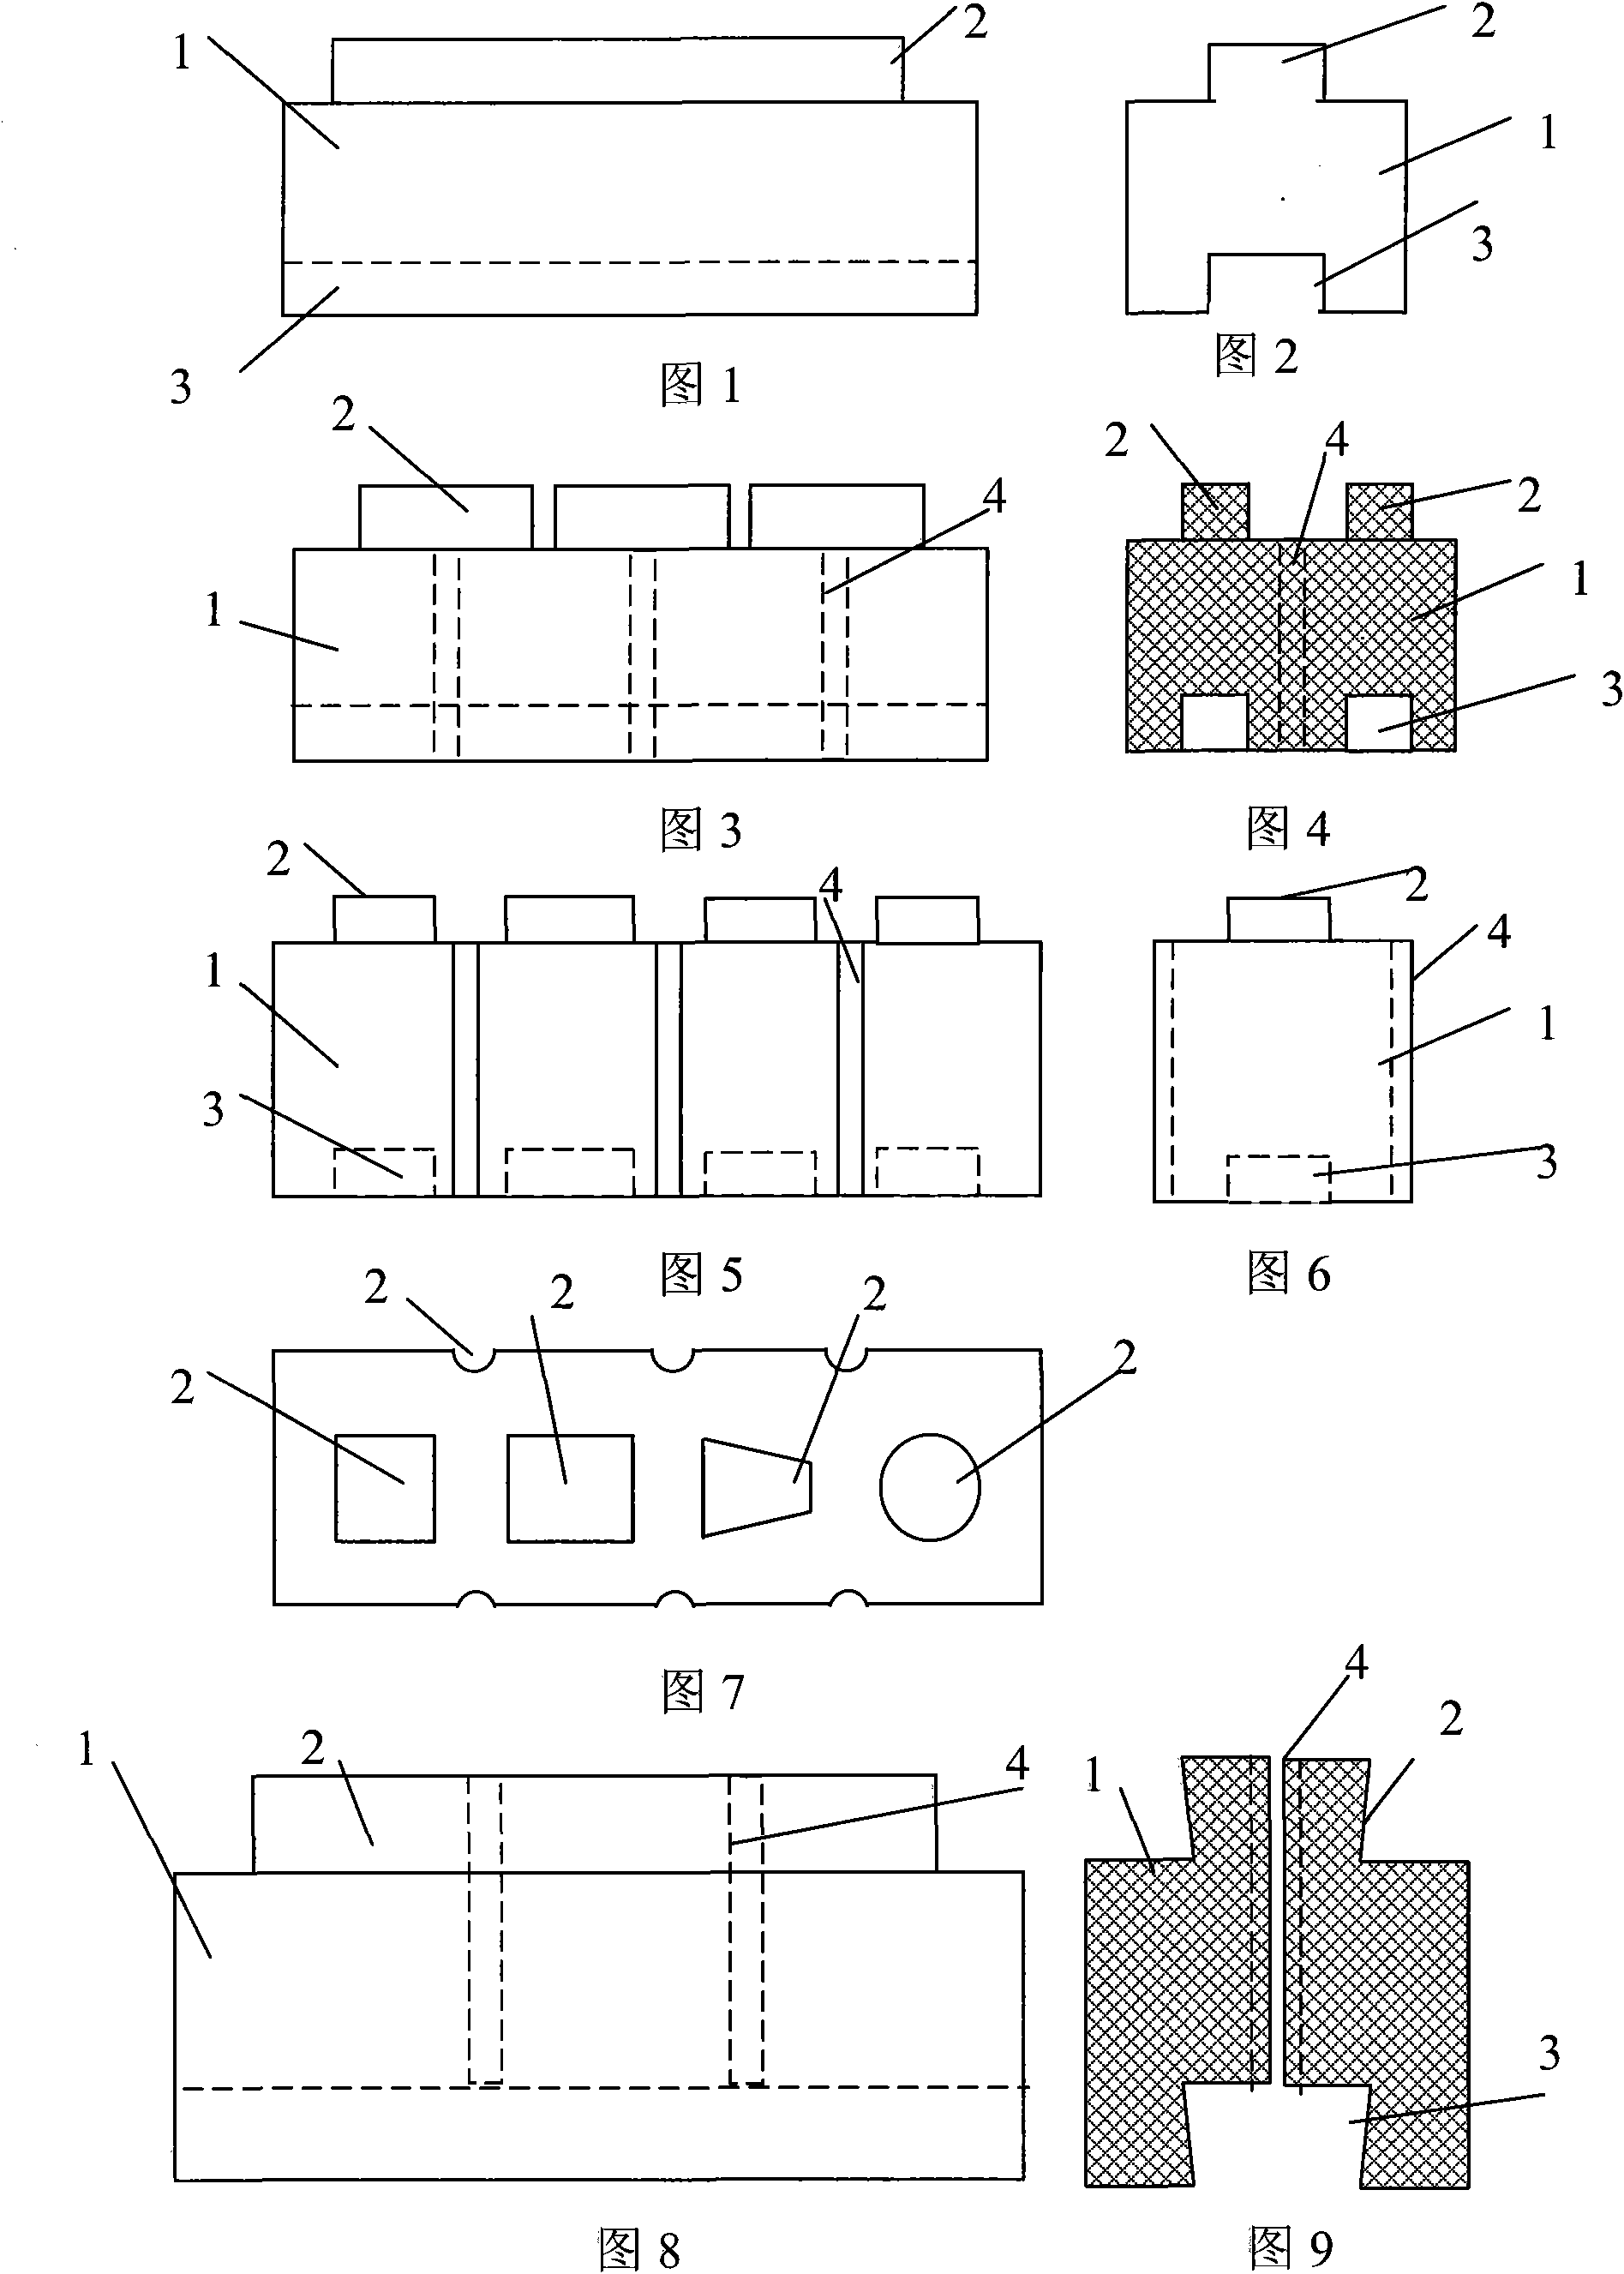 Prebaked anode carbon block structure of aluminum electrolysis cell